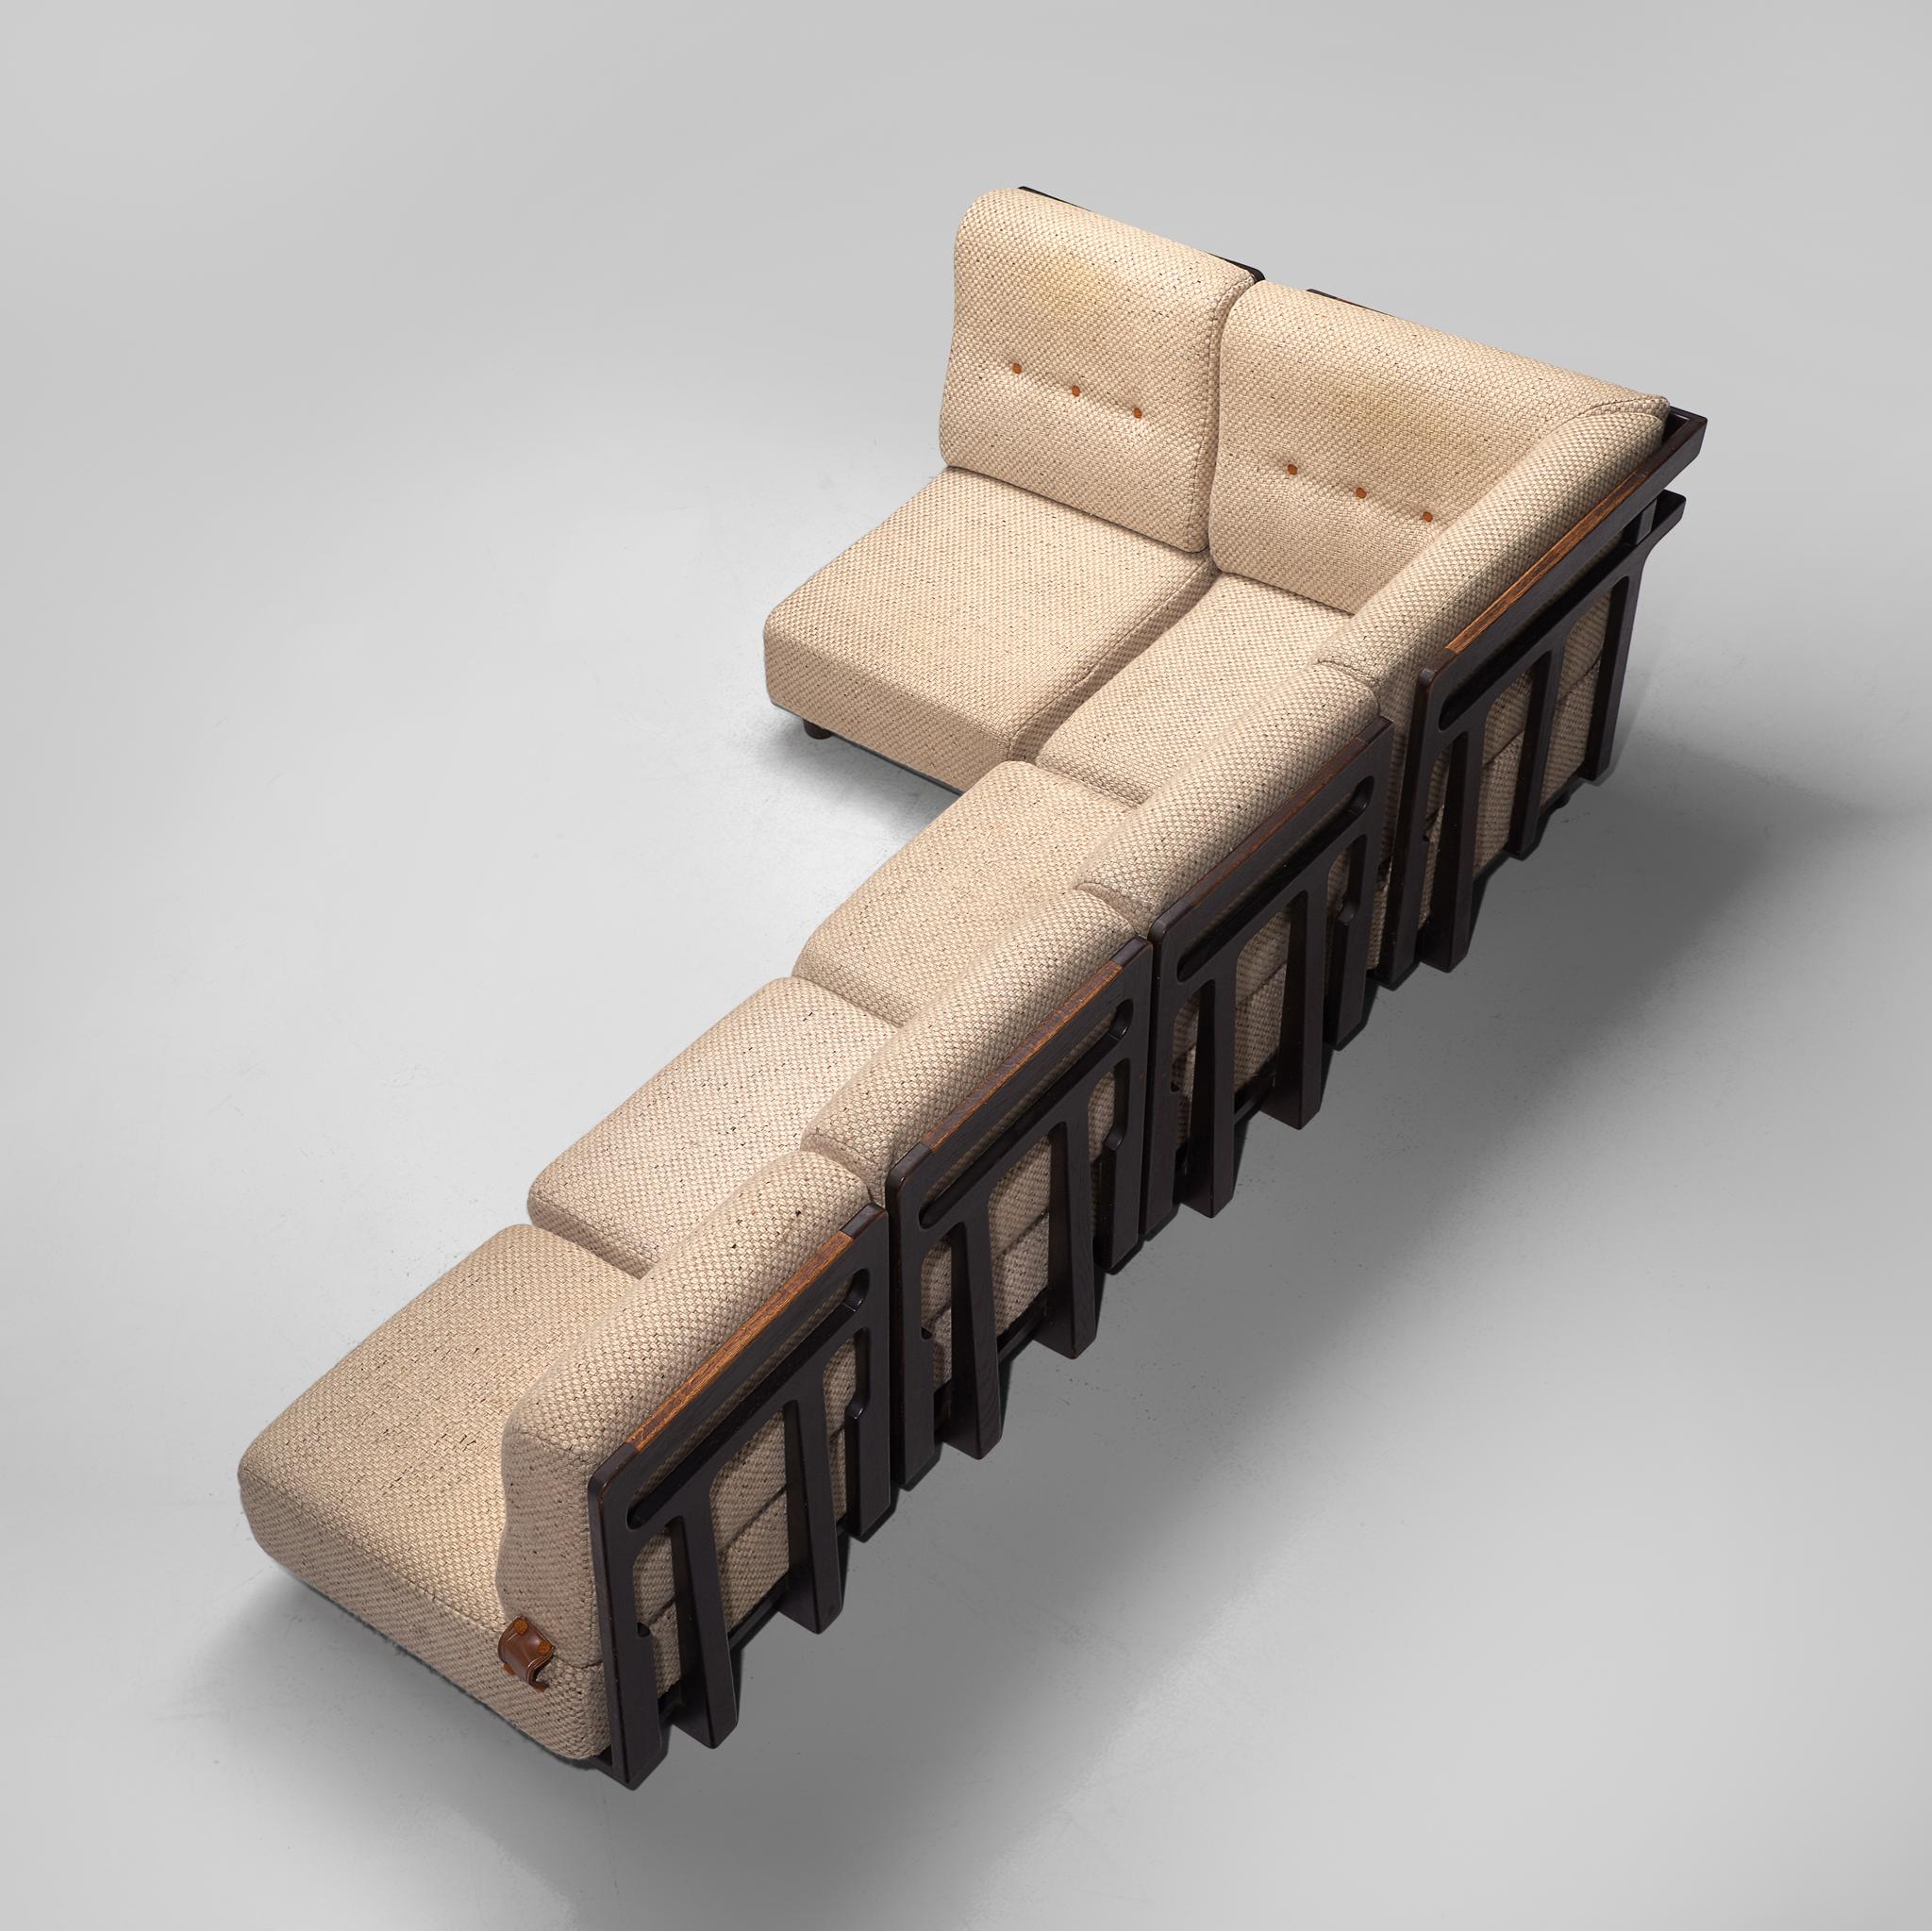 Mid-Century Modern Guillerme et Chambron Sectional Sofa 'Elmyre' in Beige Fabric